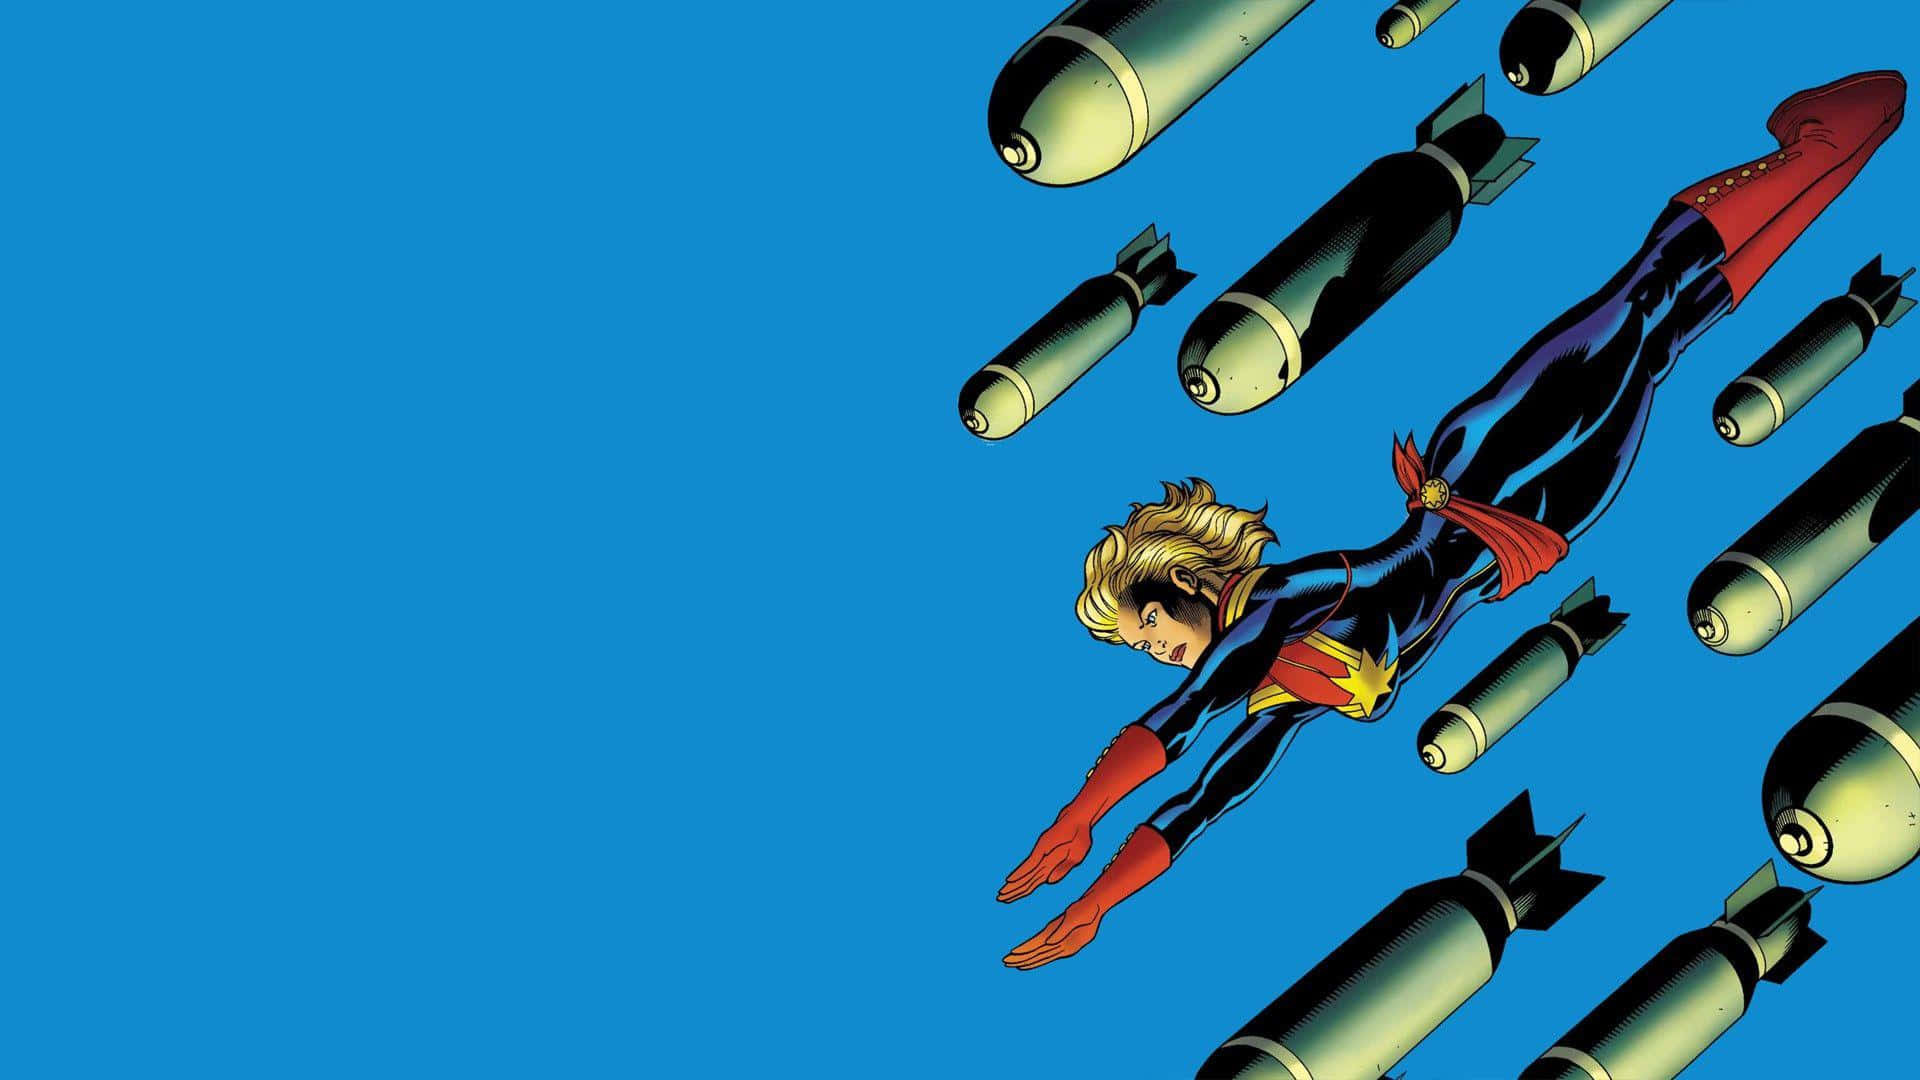 Captain Marvel Takes Flight In Her Powerful Suit In This Hd Wallpaper Wallpaper